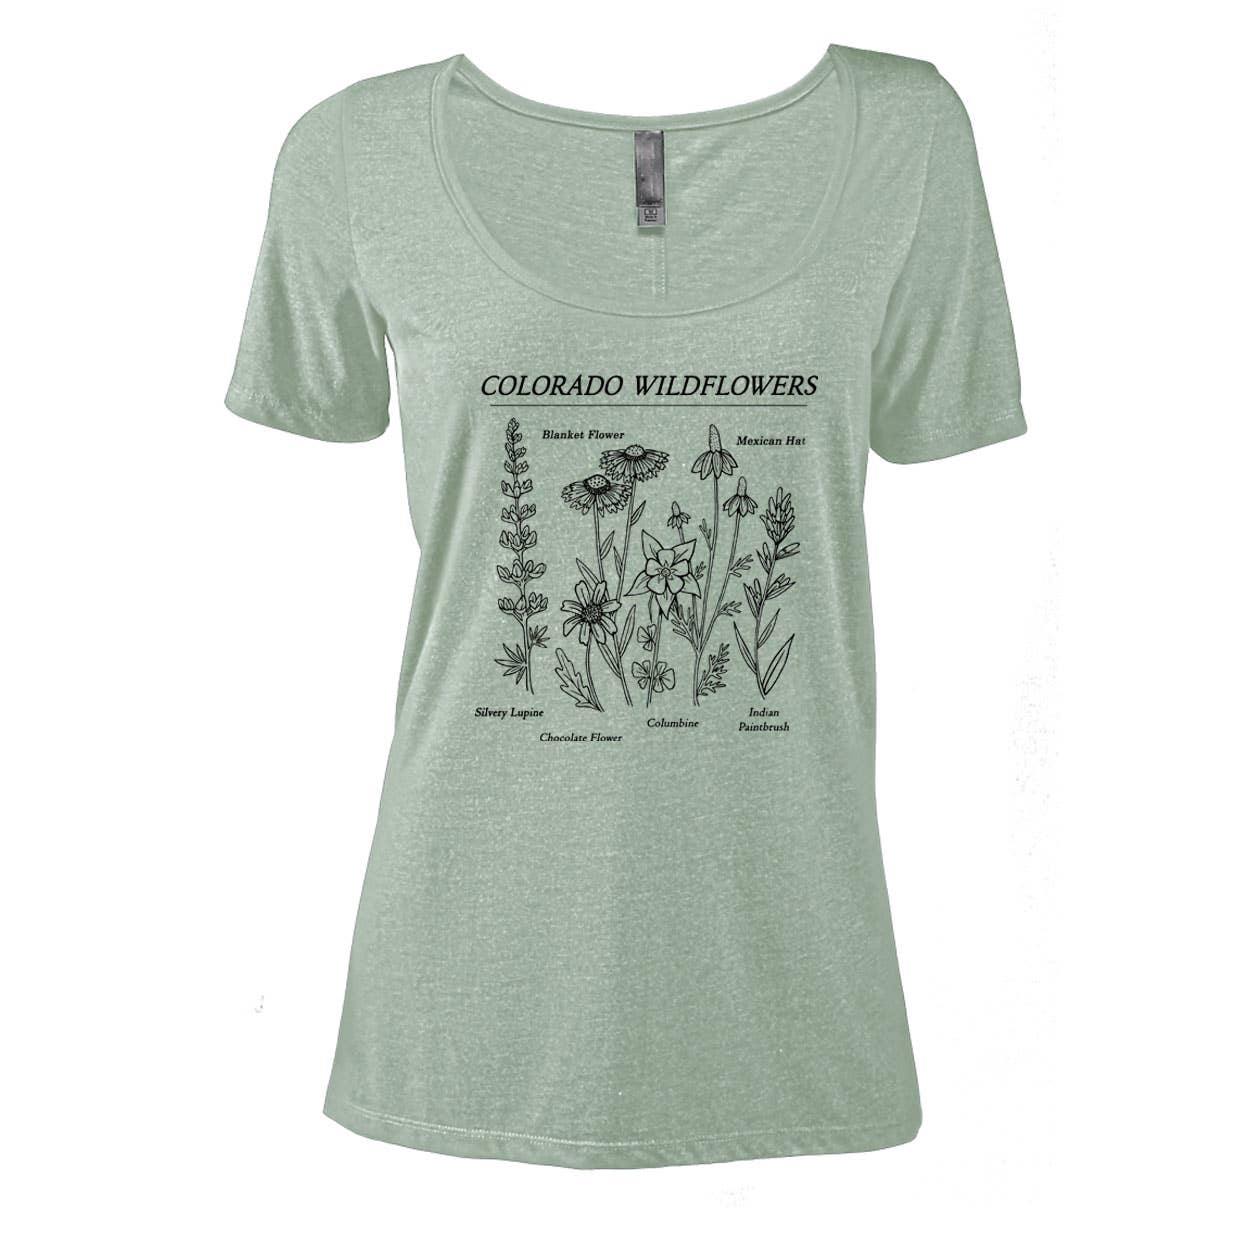 Akinz | Colorado Wildflowers Fitted Women's T-Shirt - Turquoise, T-Shirts, Akinz, Defiance Outdoor Gear Co.